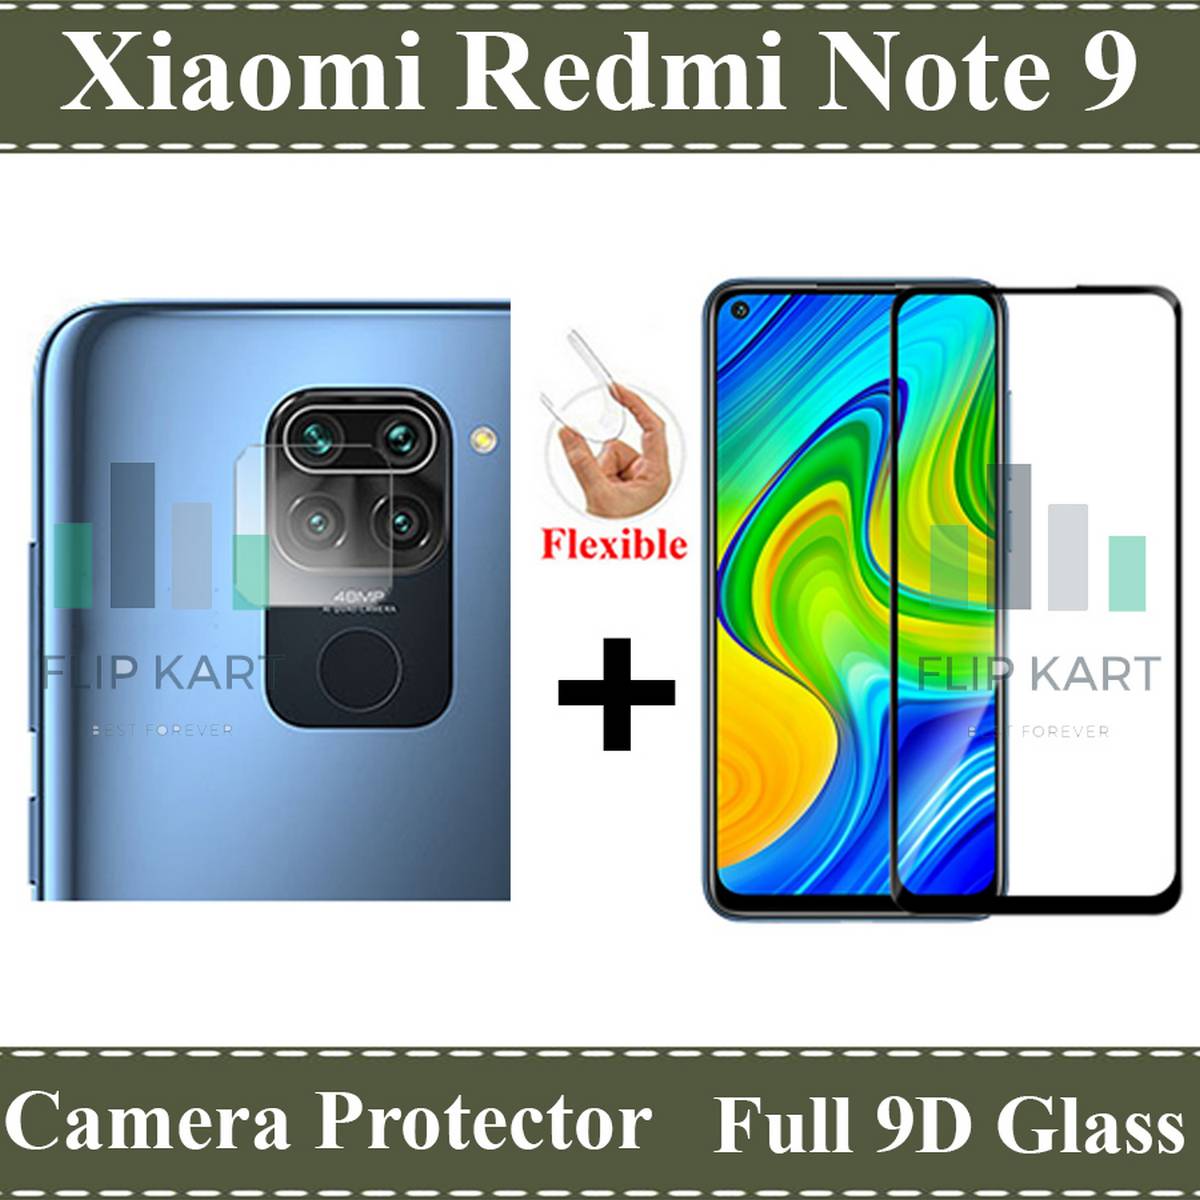 Tempered Glass Screen Protector for XIAOMI REDMI NOTE 9 Premium Quality 9H  0.33mm - AliExpress